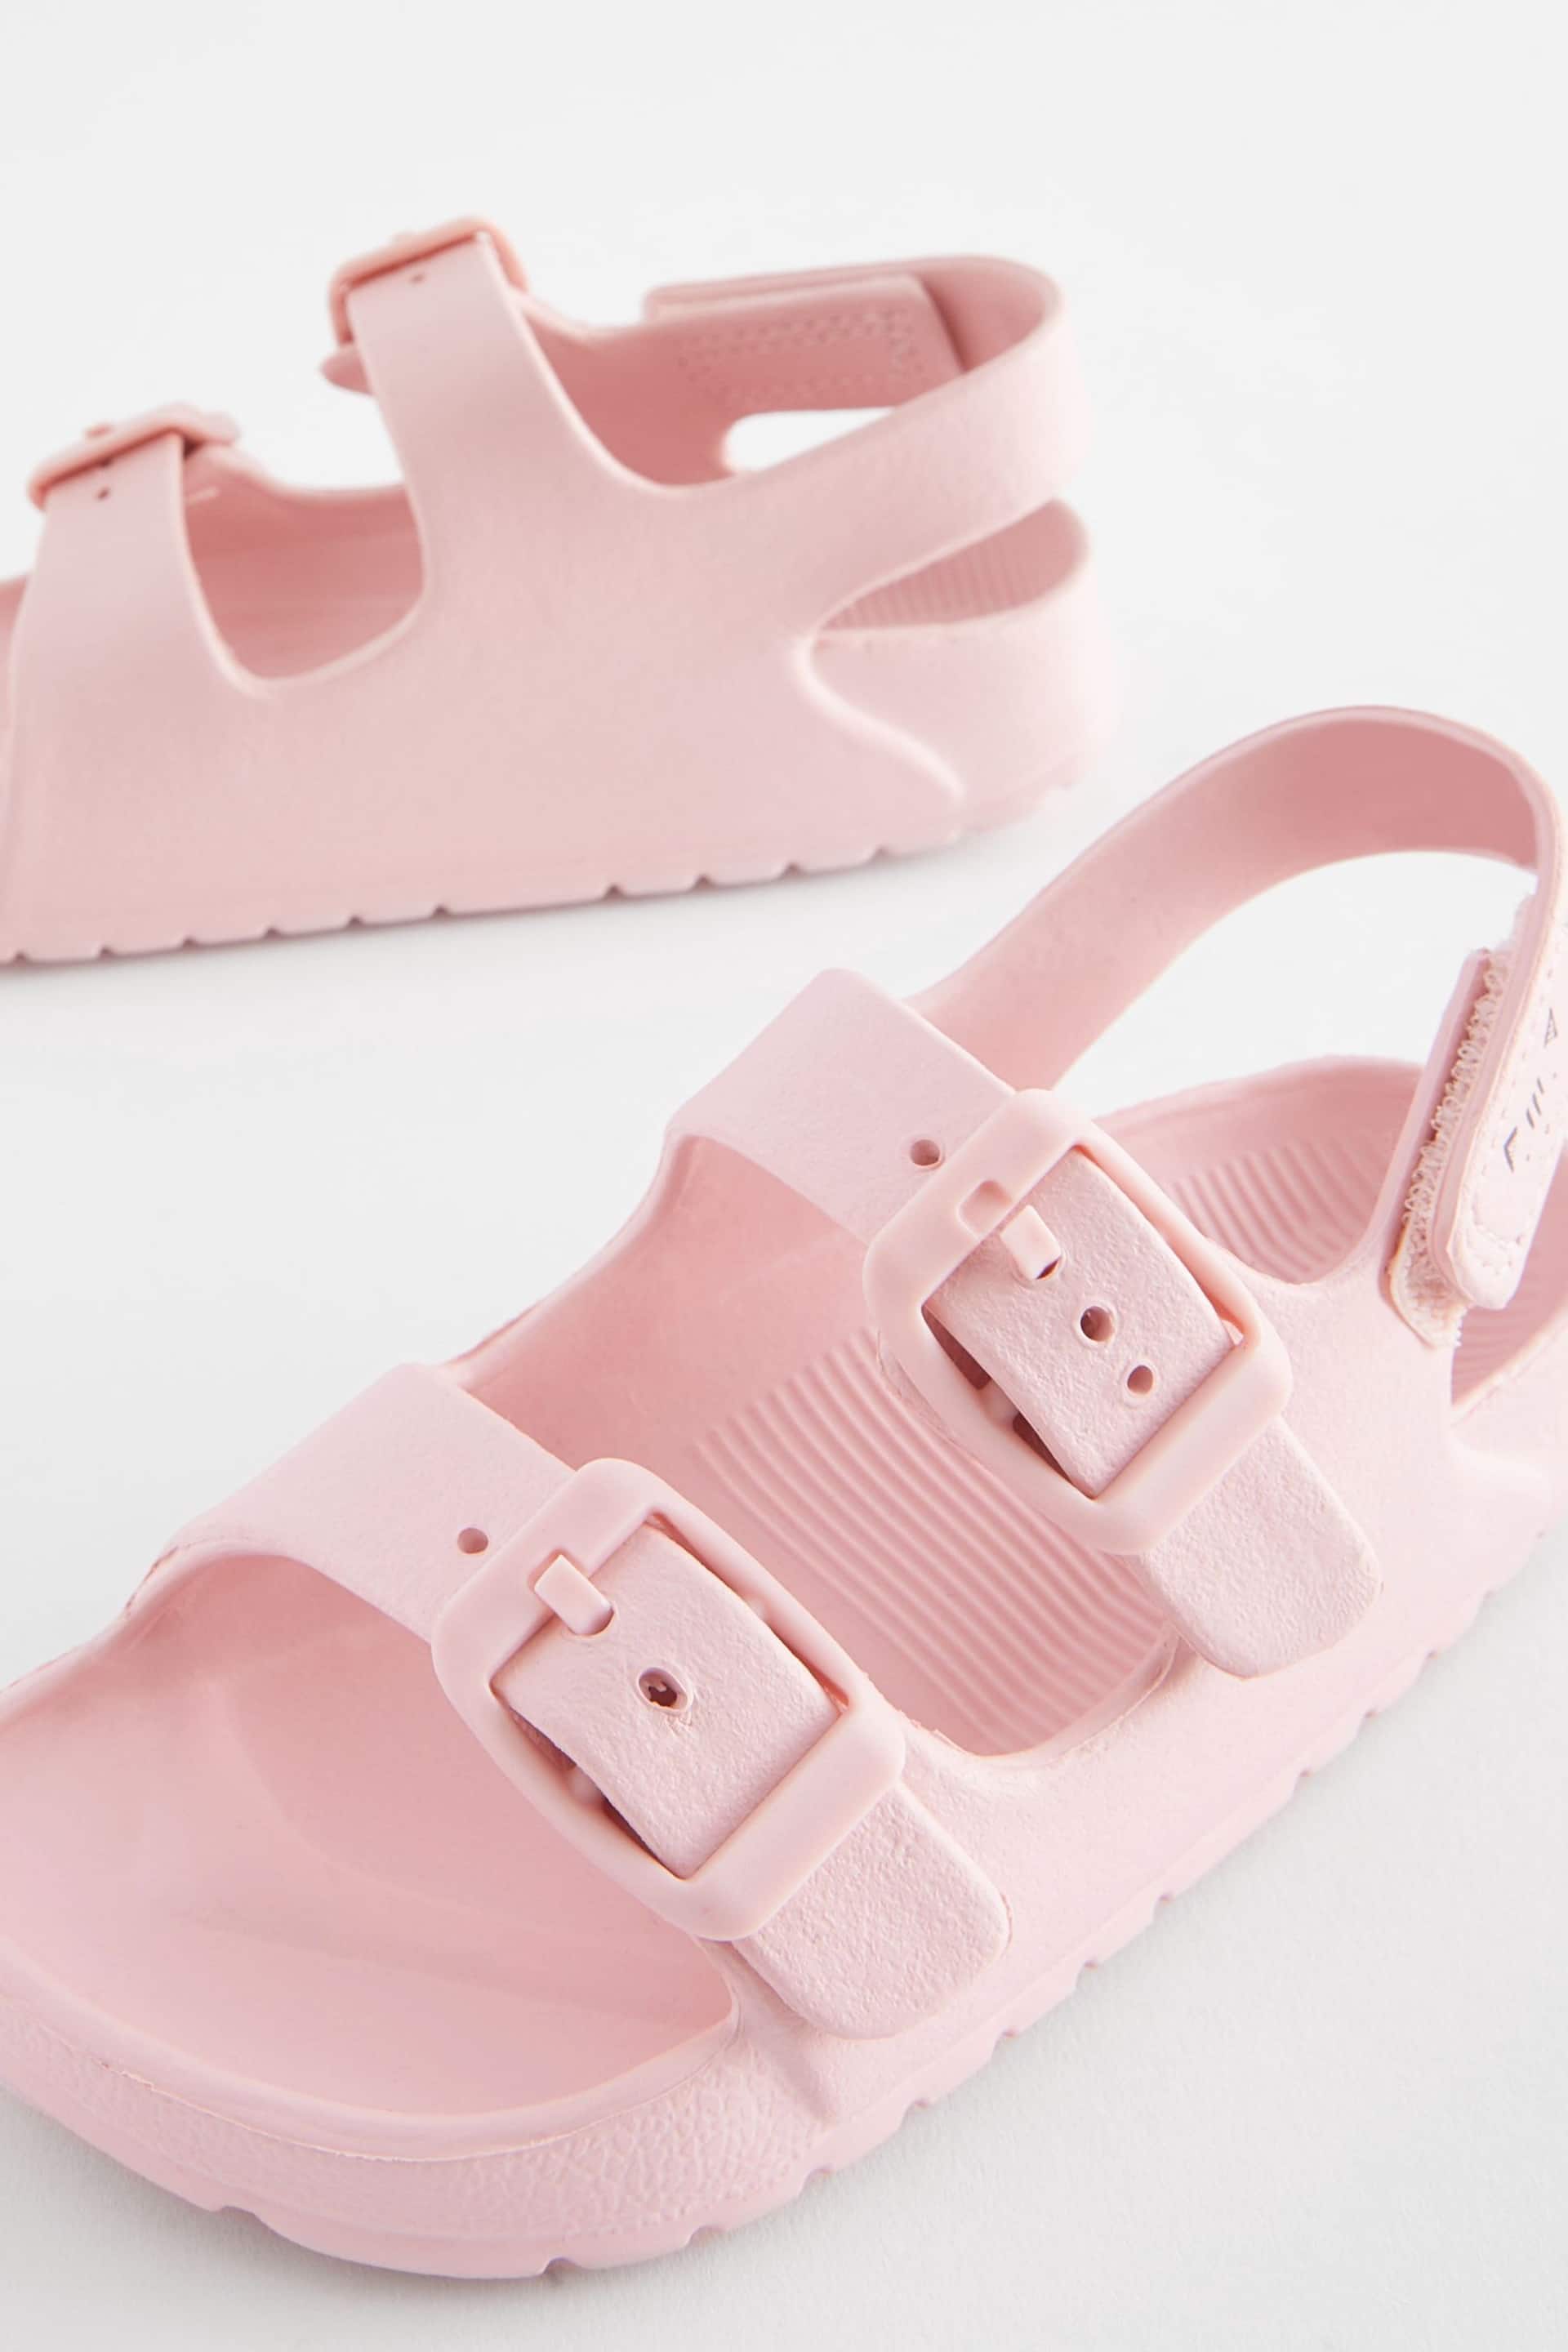 Pink Two Strap Sandals - Image 3 of 5